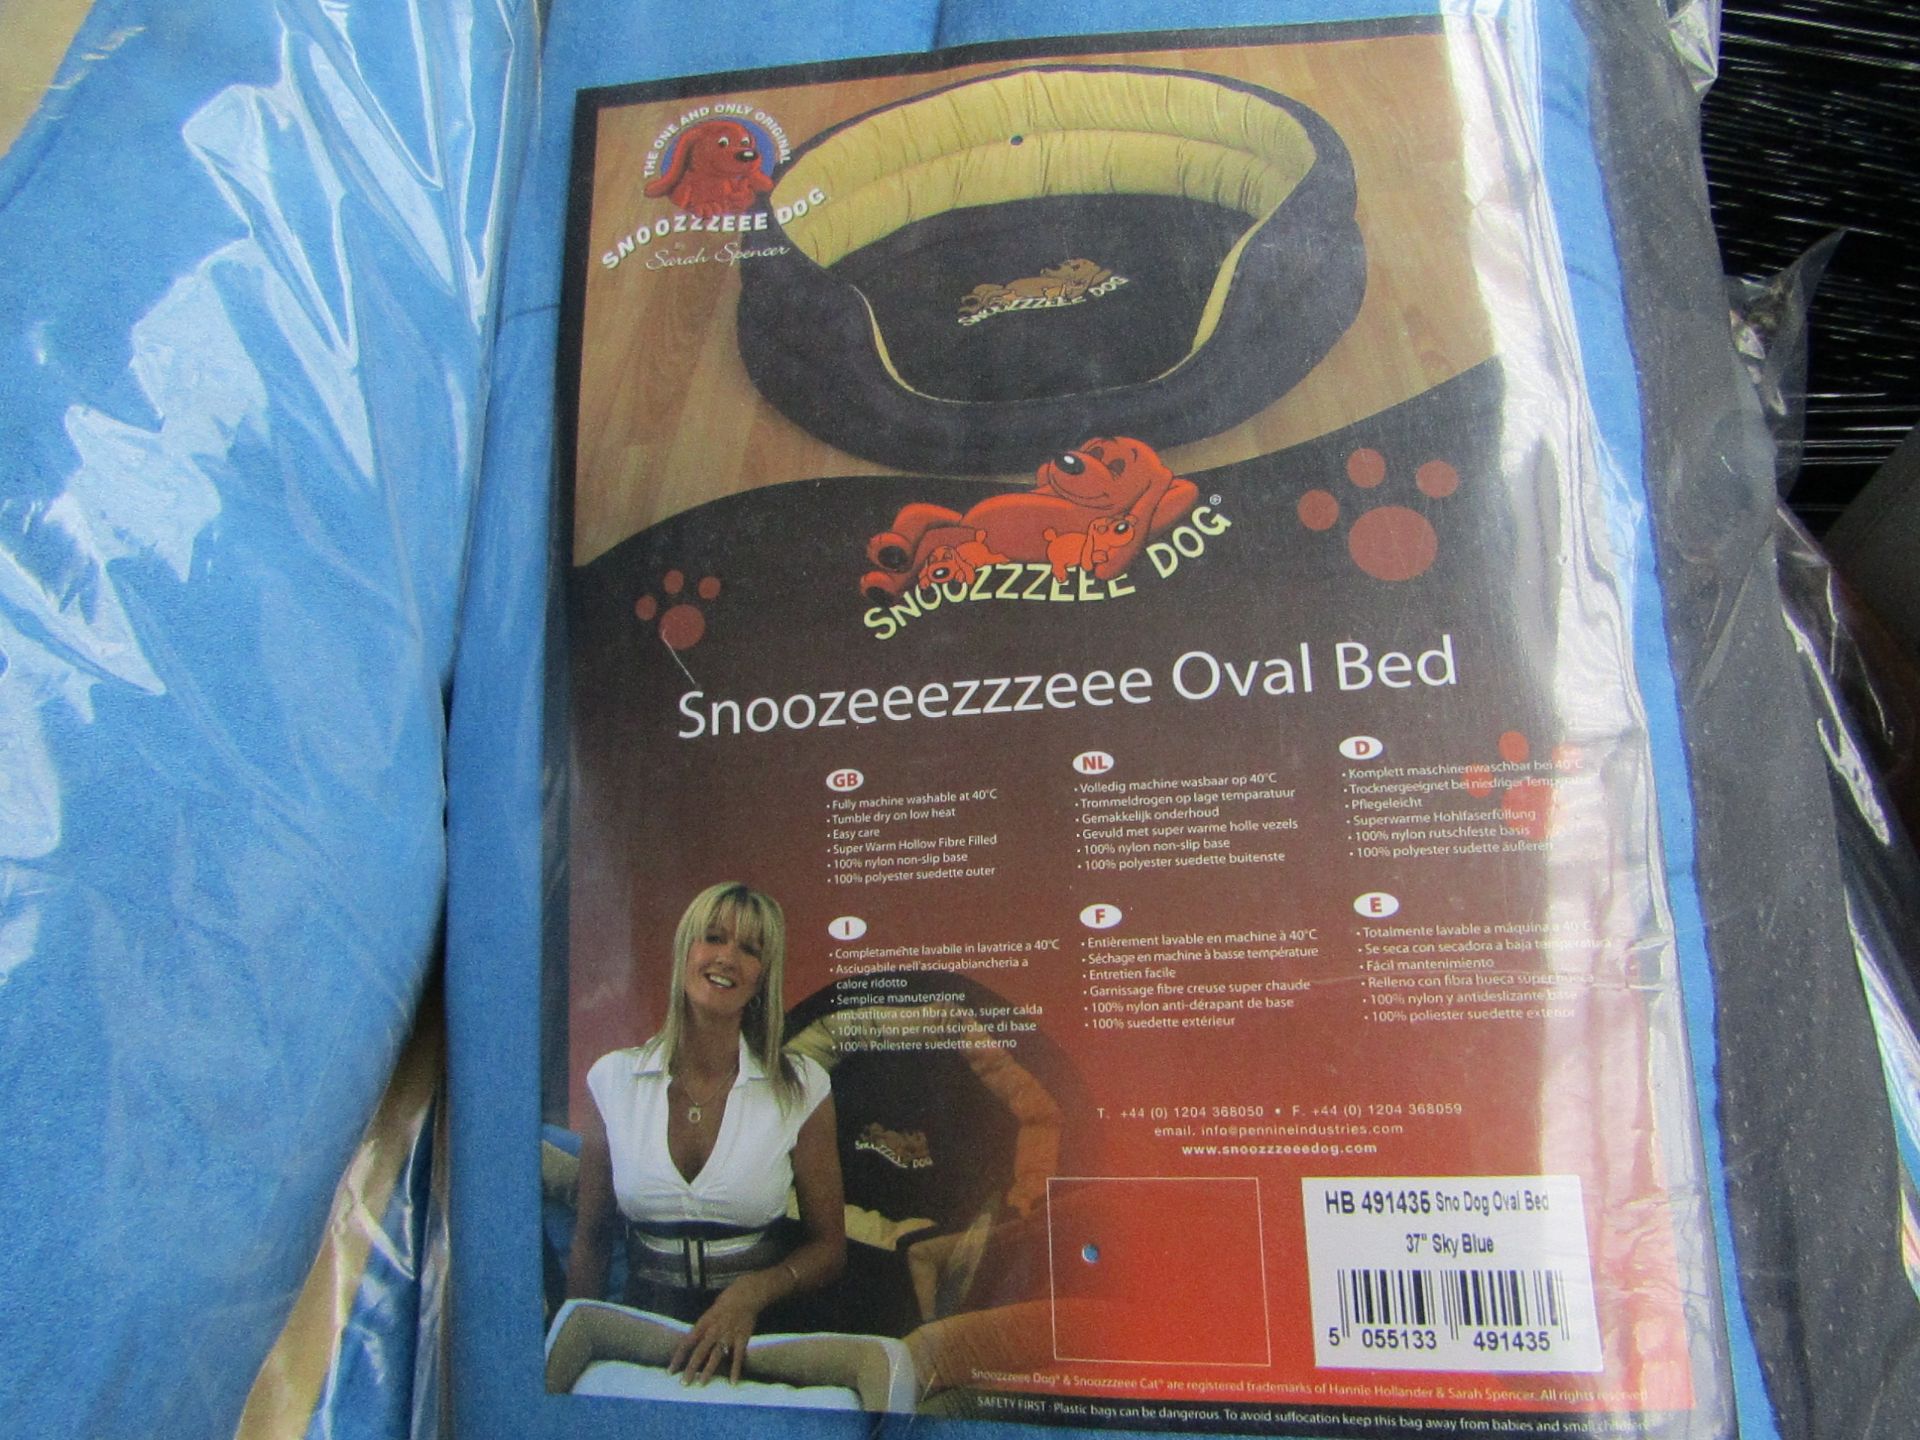 5x Snoozzzeee Dog - Oval Sky Blue Dog Bed (37") - All New & Packaged.